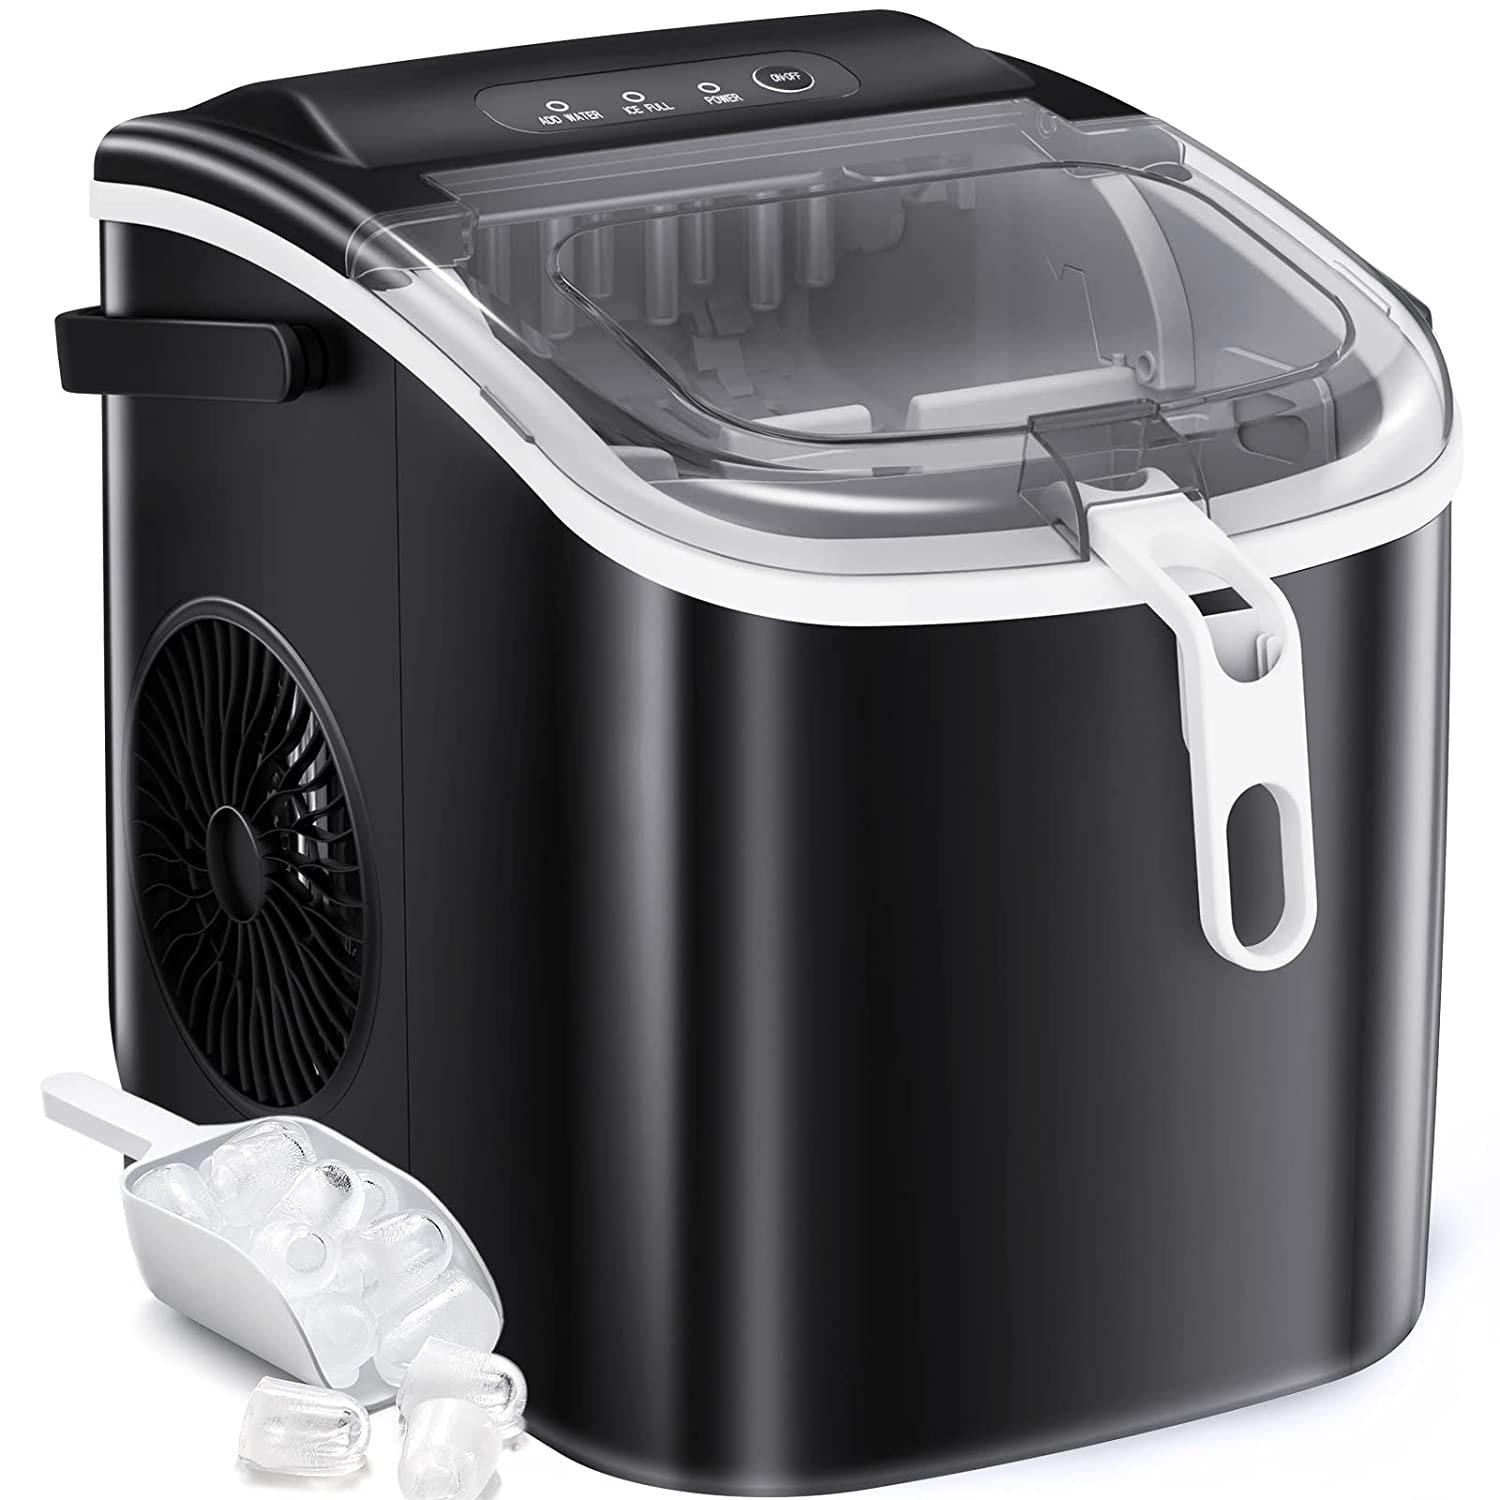 Frigidaire's countertop ice maker is perfect for summer parties at